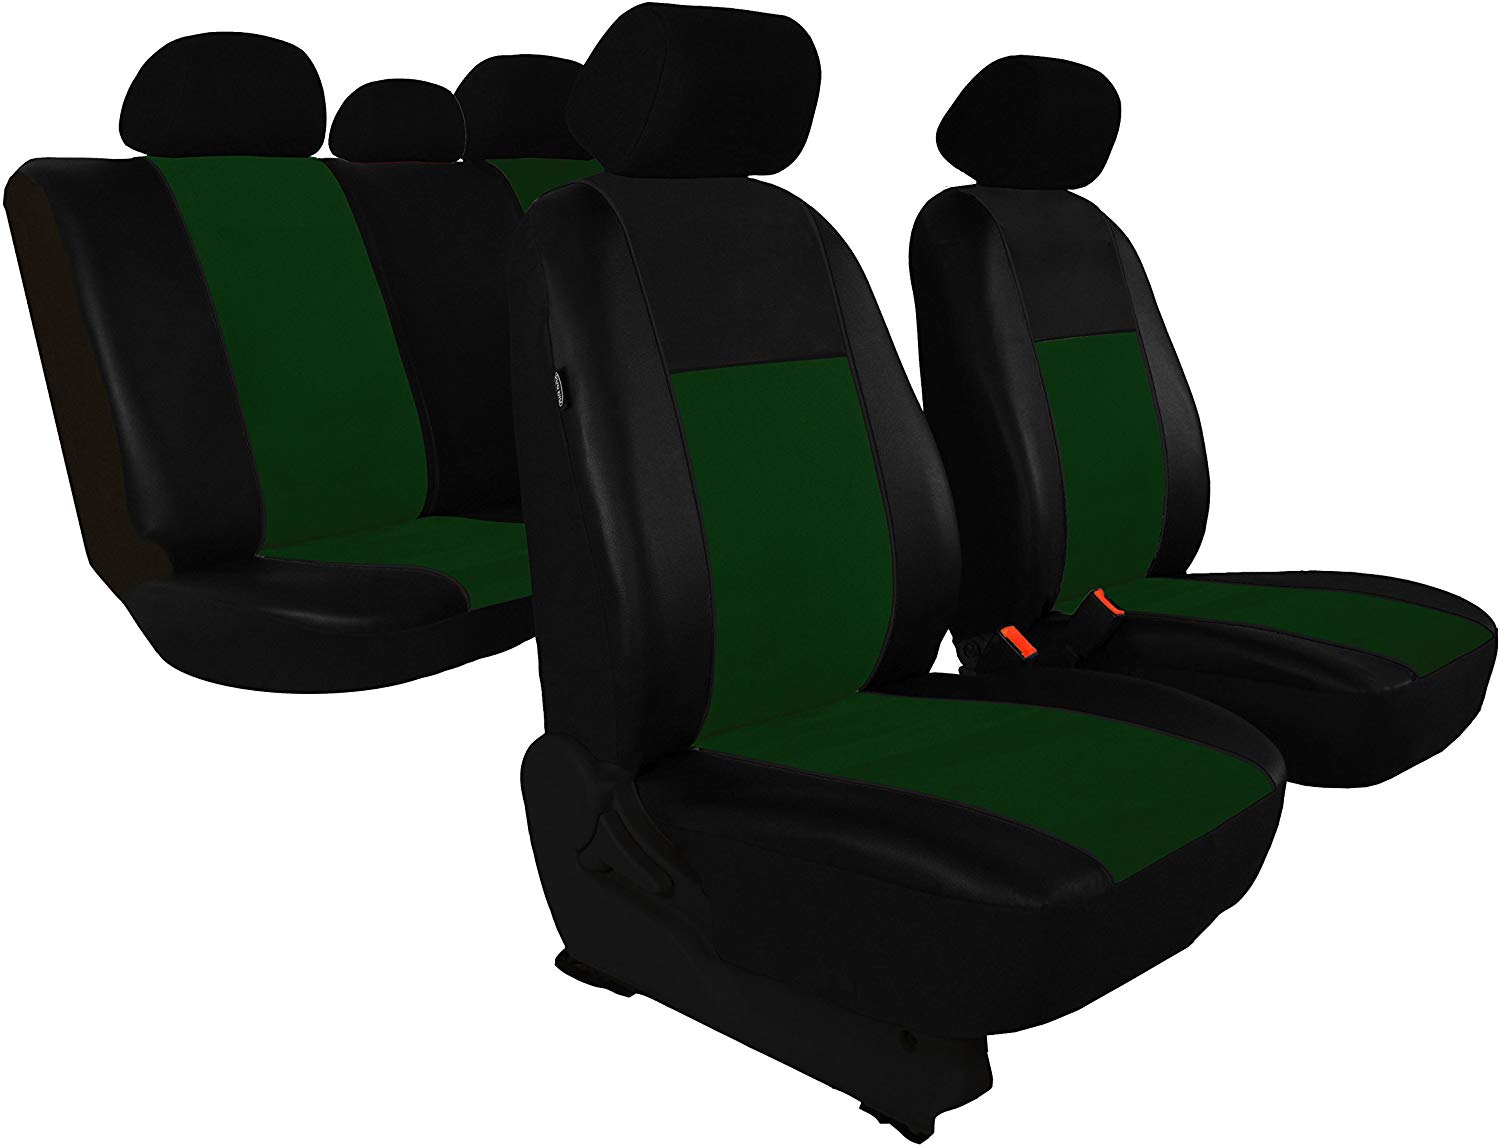 SEAT COVER FOR HYUNDAI TUCSON FROM 2015. Includes Green \'Unico (Other Offers Available in 7 Colours)